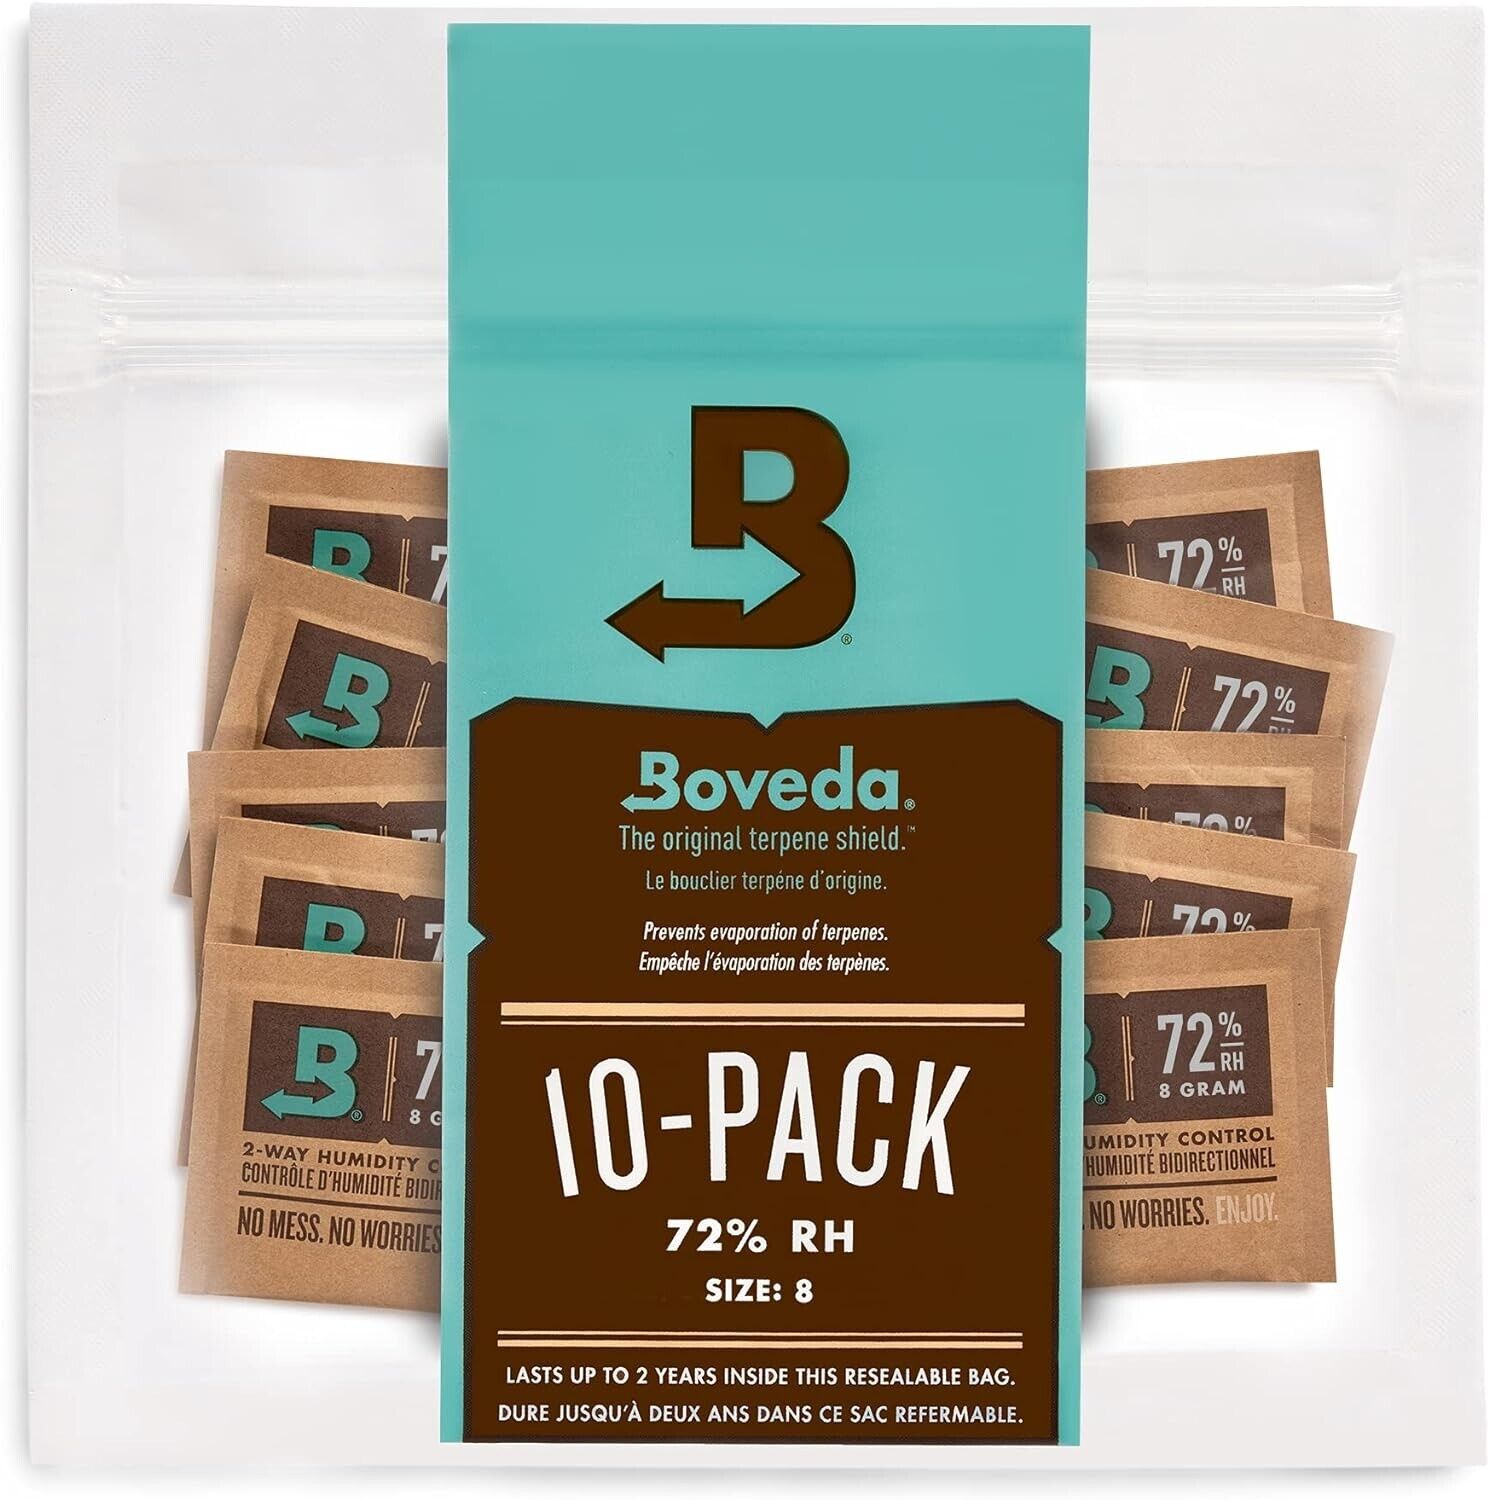 Boveda 72% RH 2-Way Humidity Control - Protects & Restores - Size 8 - 10 Count